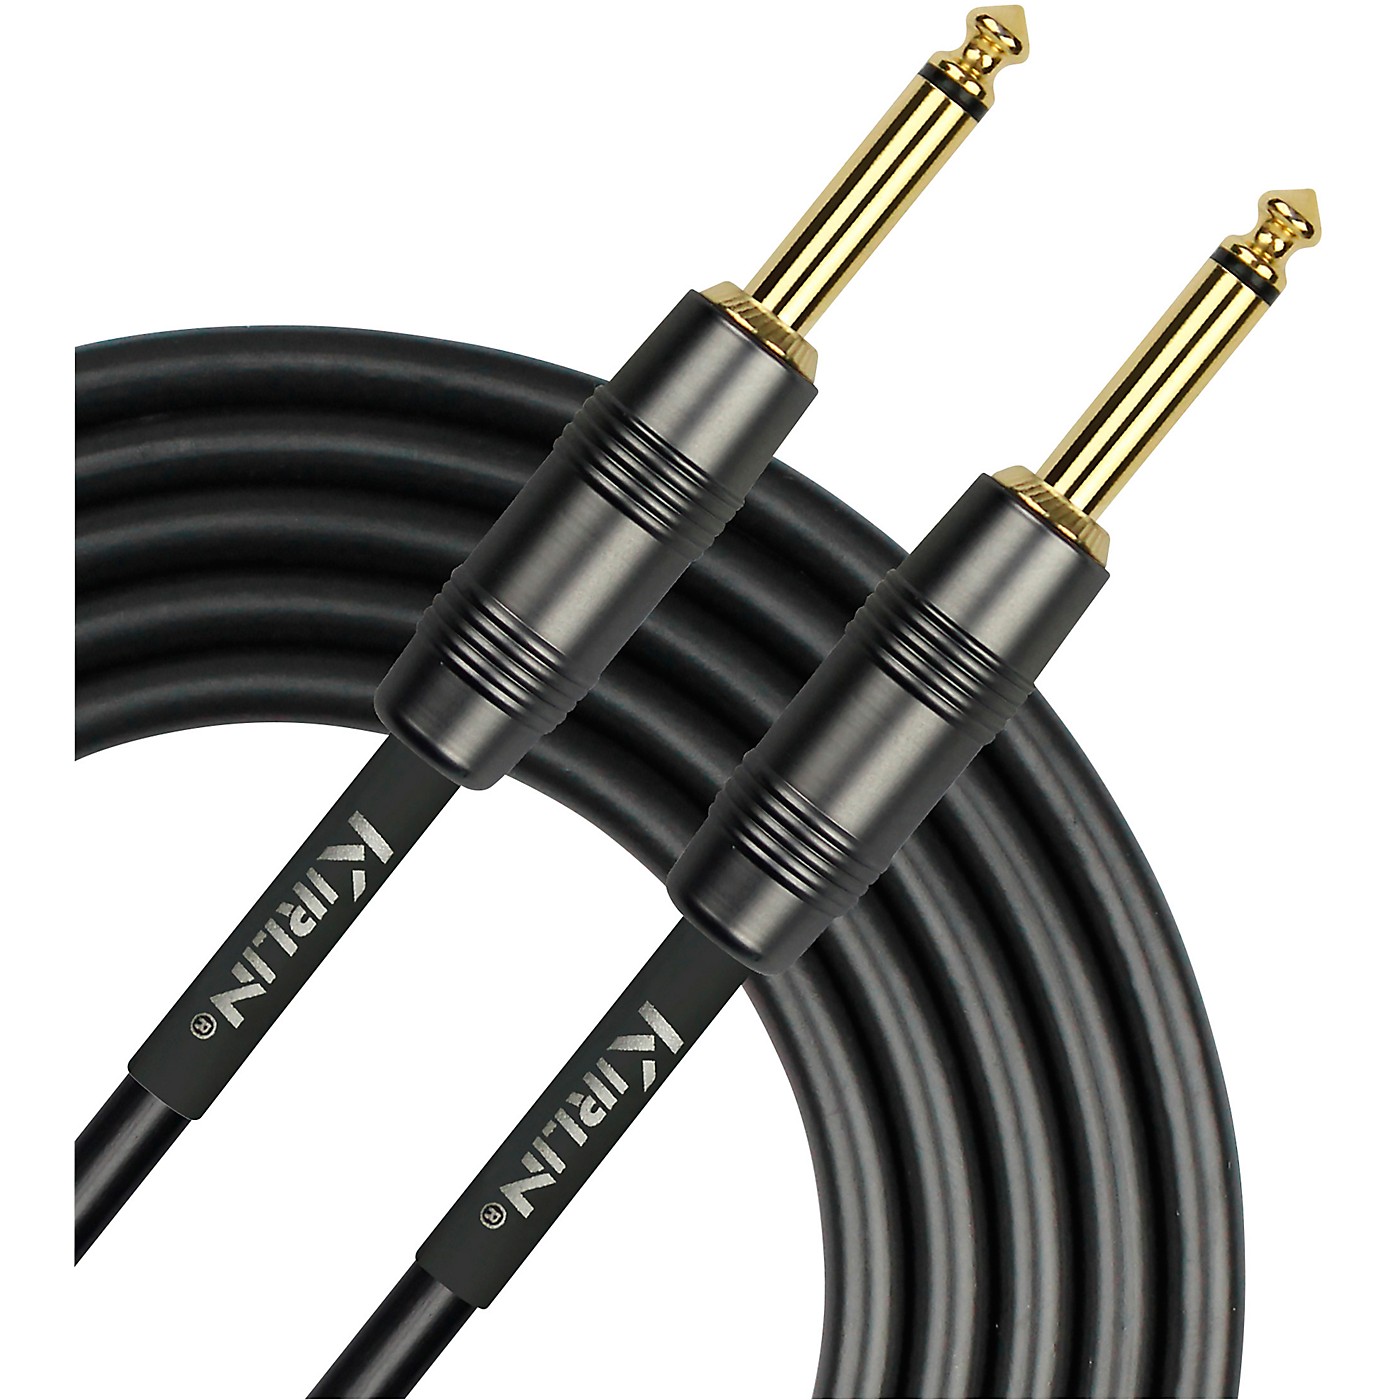 KIRLIN 22AWG Instrument Cable, Carbon Black, 1/4